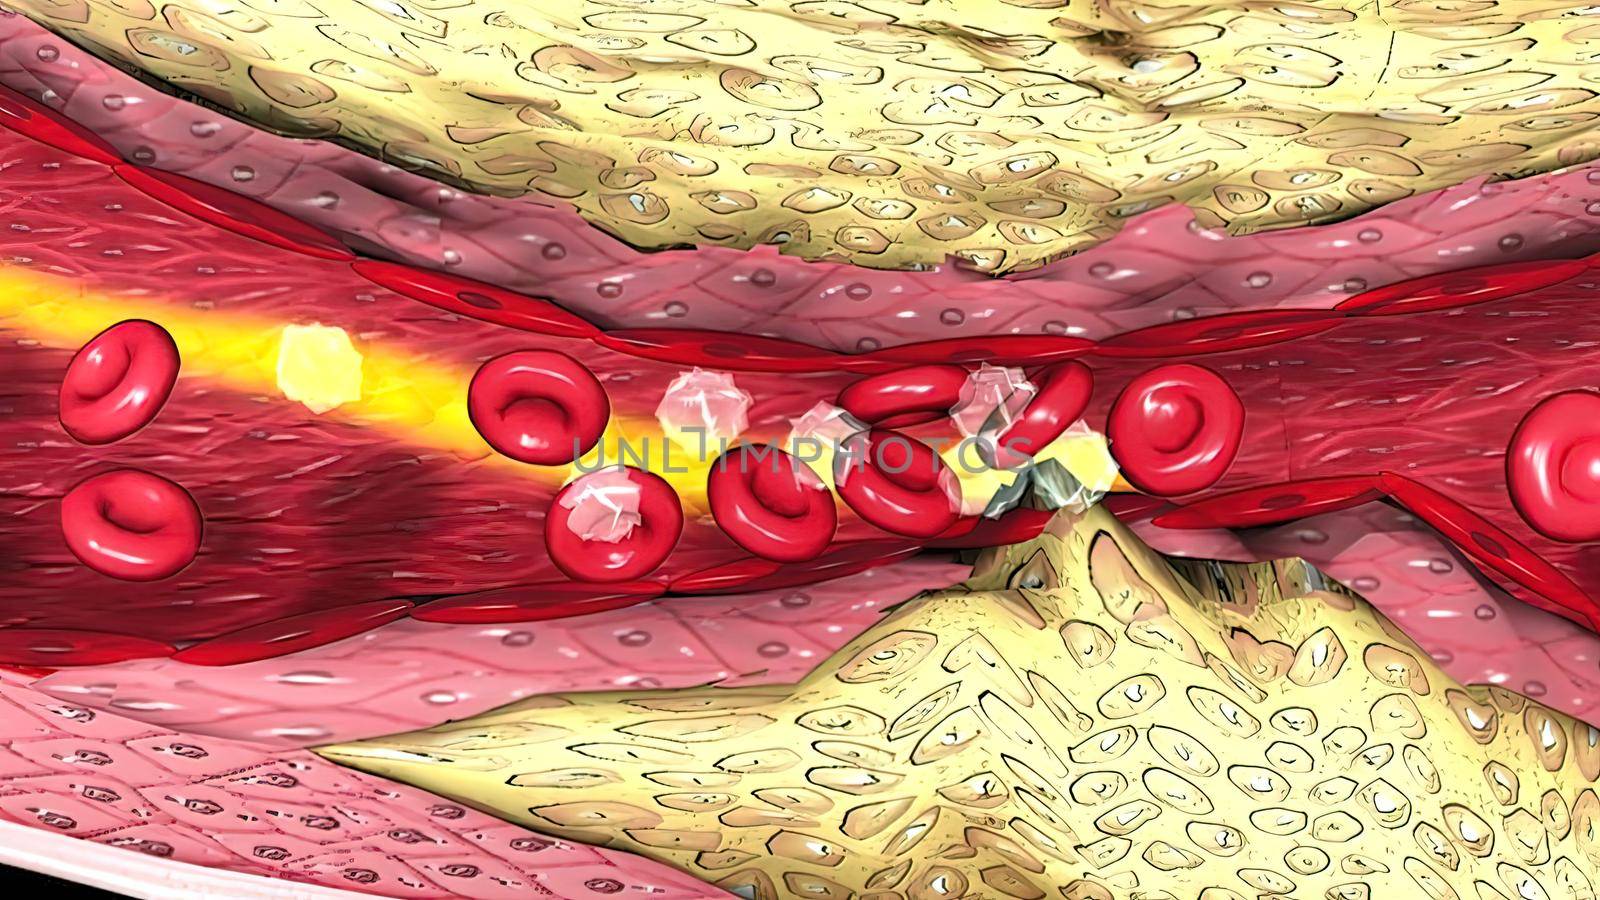 Coronary atherosclerosis, light micrograph showing cholesterol-containing plaque by creativepic